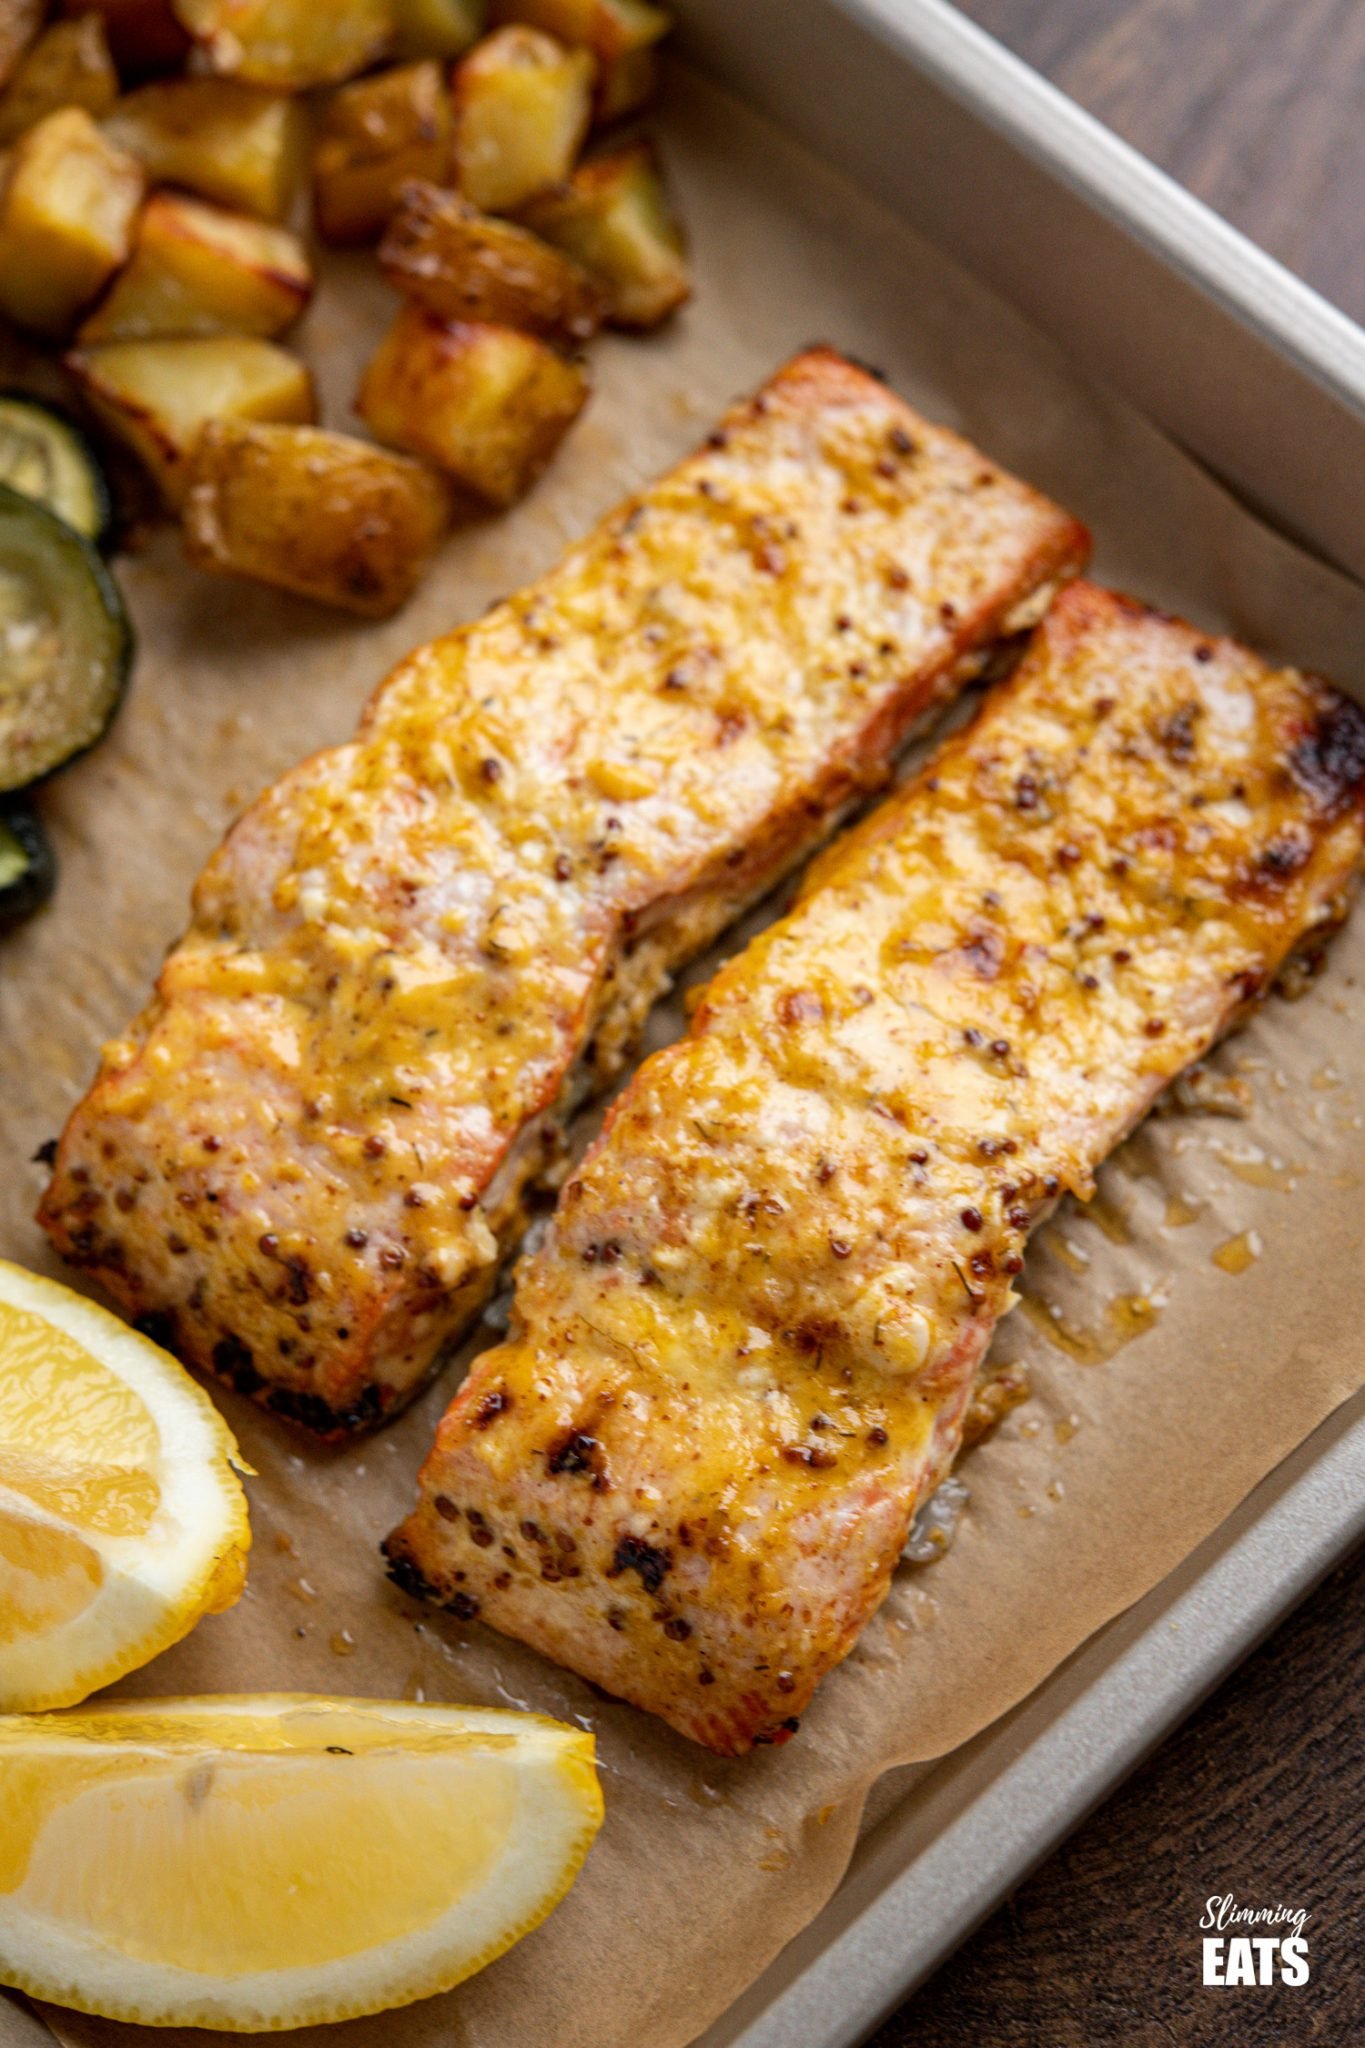 Oven Baked Mustard Salmon Fillets on parchment lined tray with potatoes, zucchini and lemon wedge